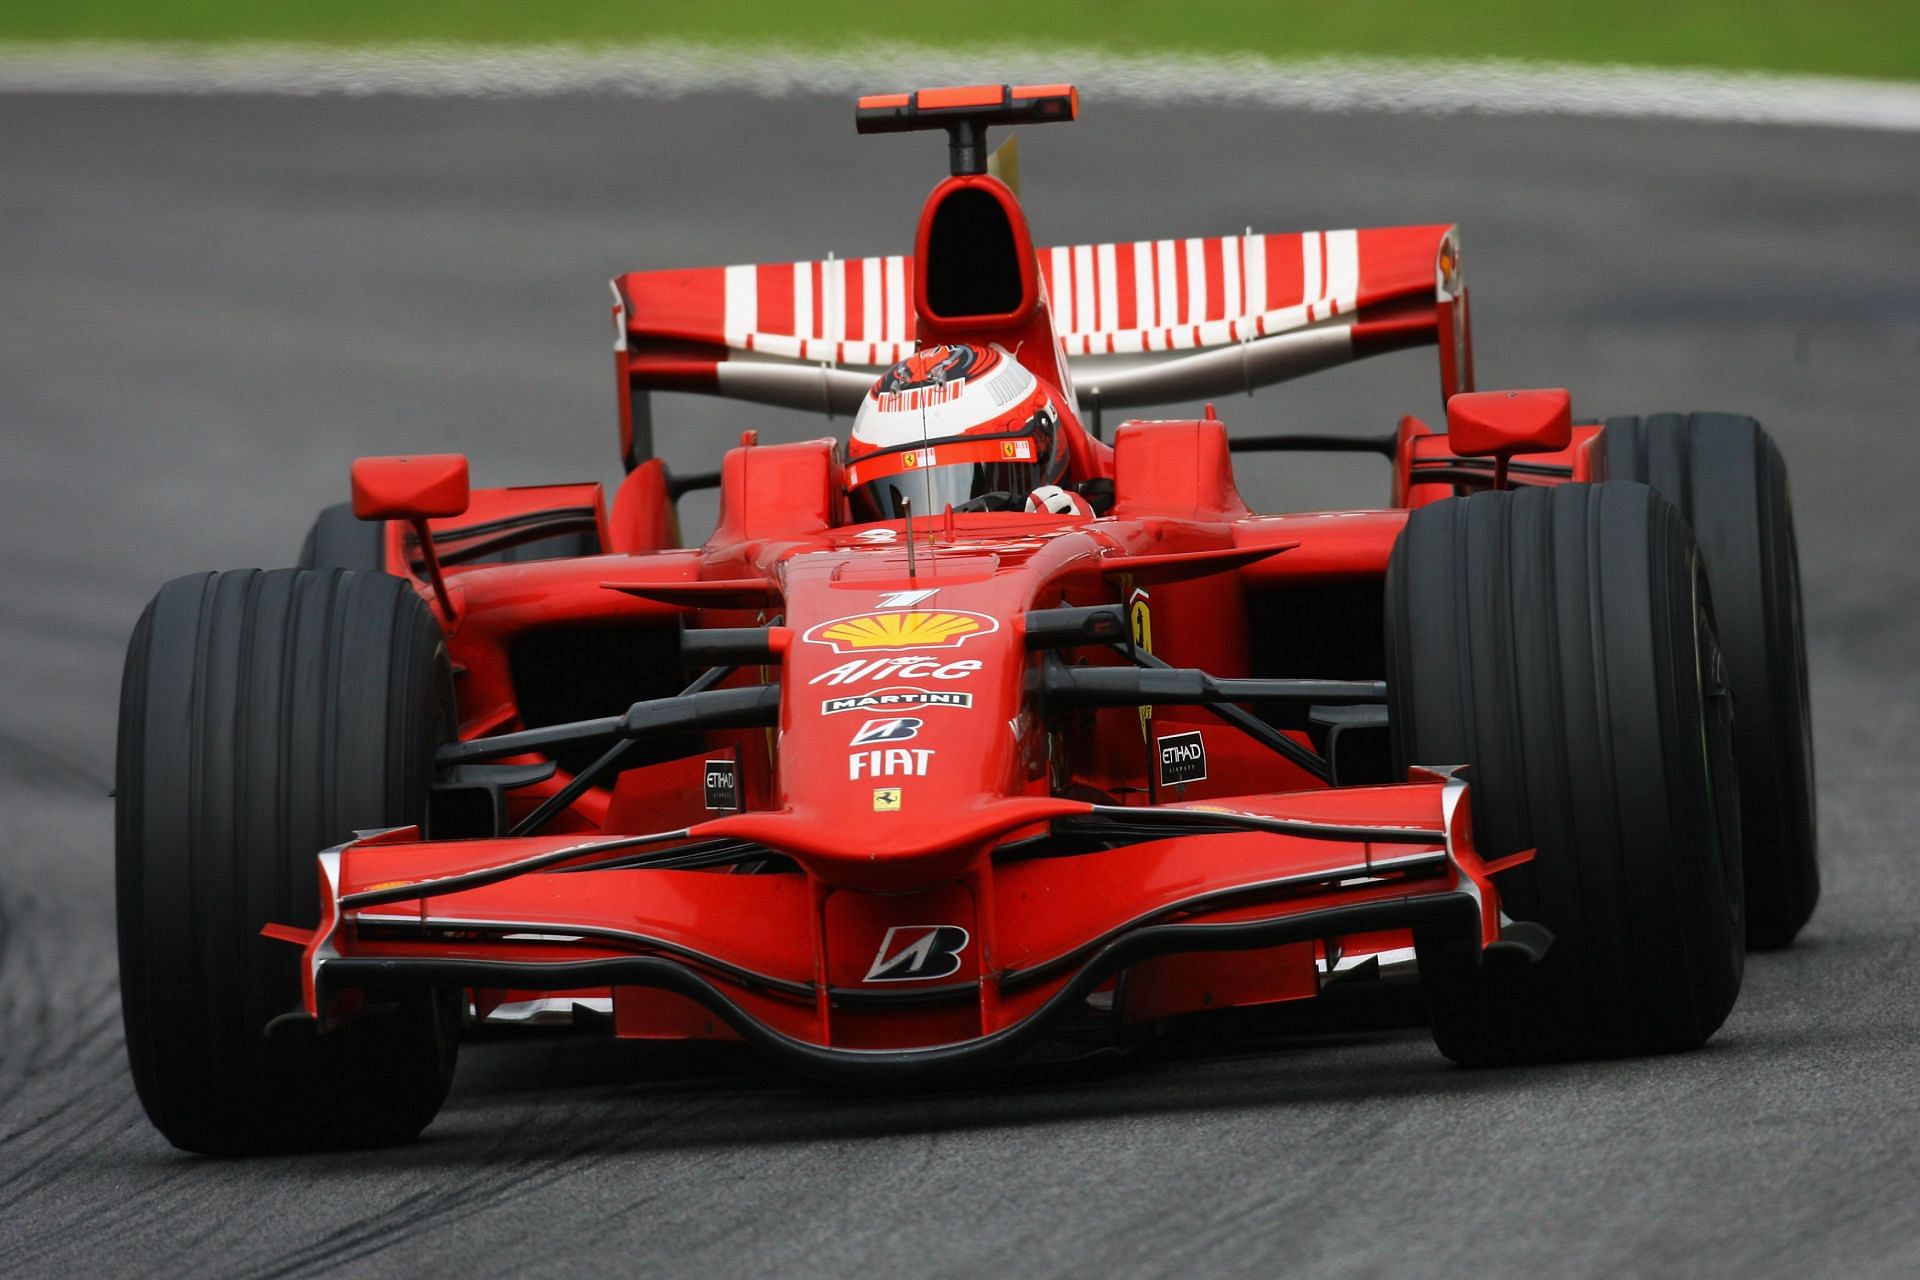 Should Charles Leclerc sign the rumored F1 contract extension with